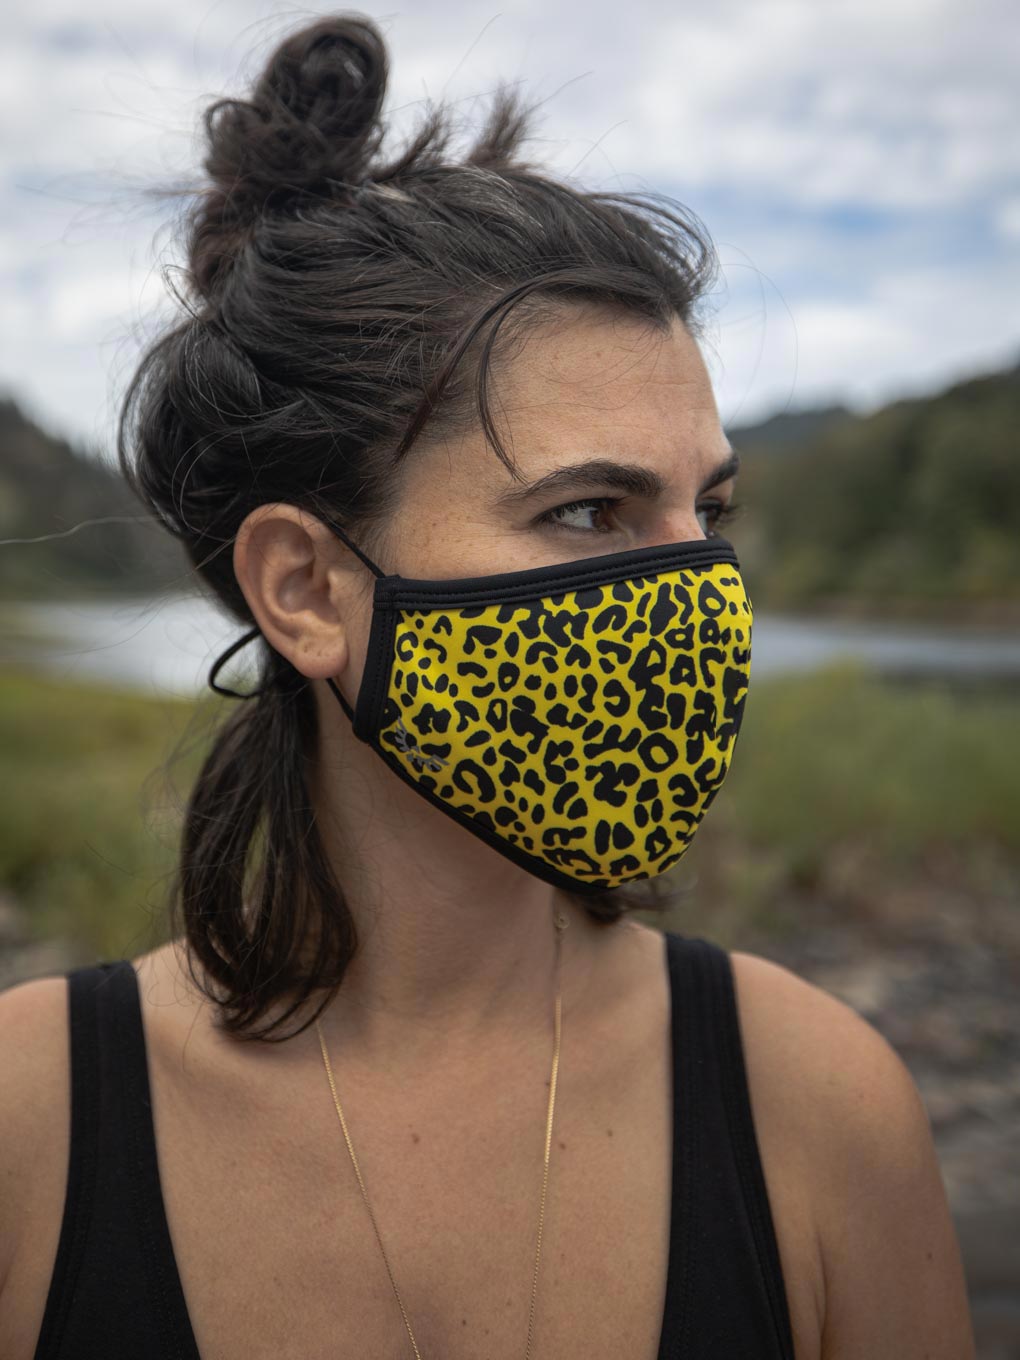 SpiritHoods Neon Yellow Cheetah Copper-Threaded Face Mask on Female